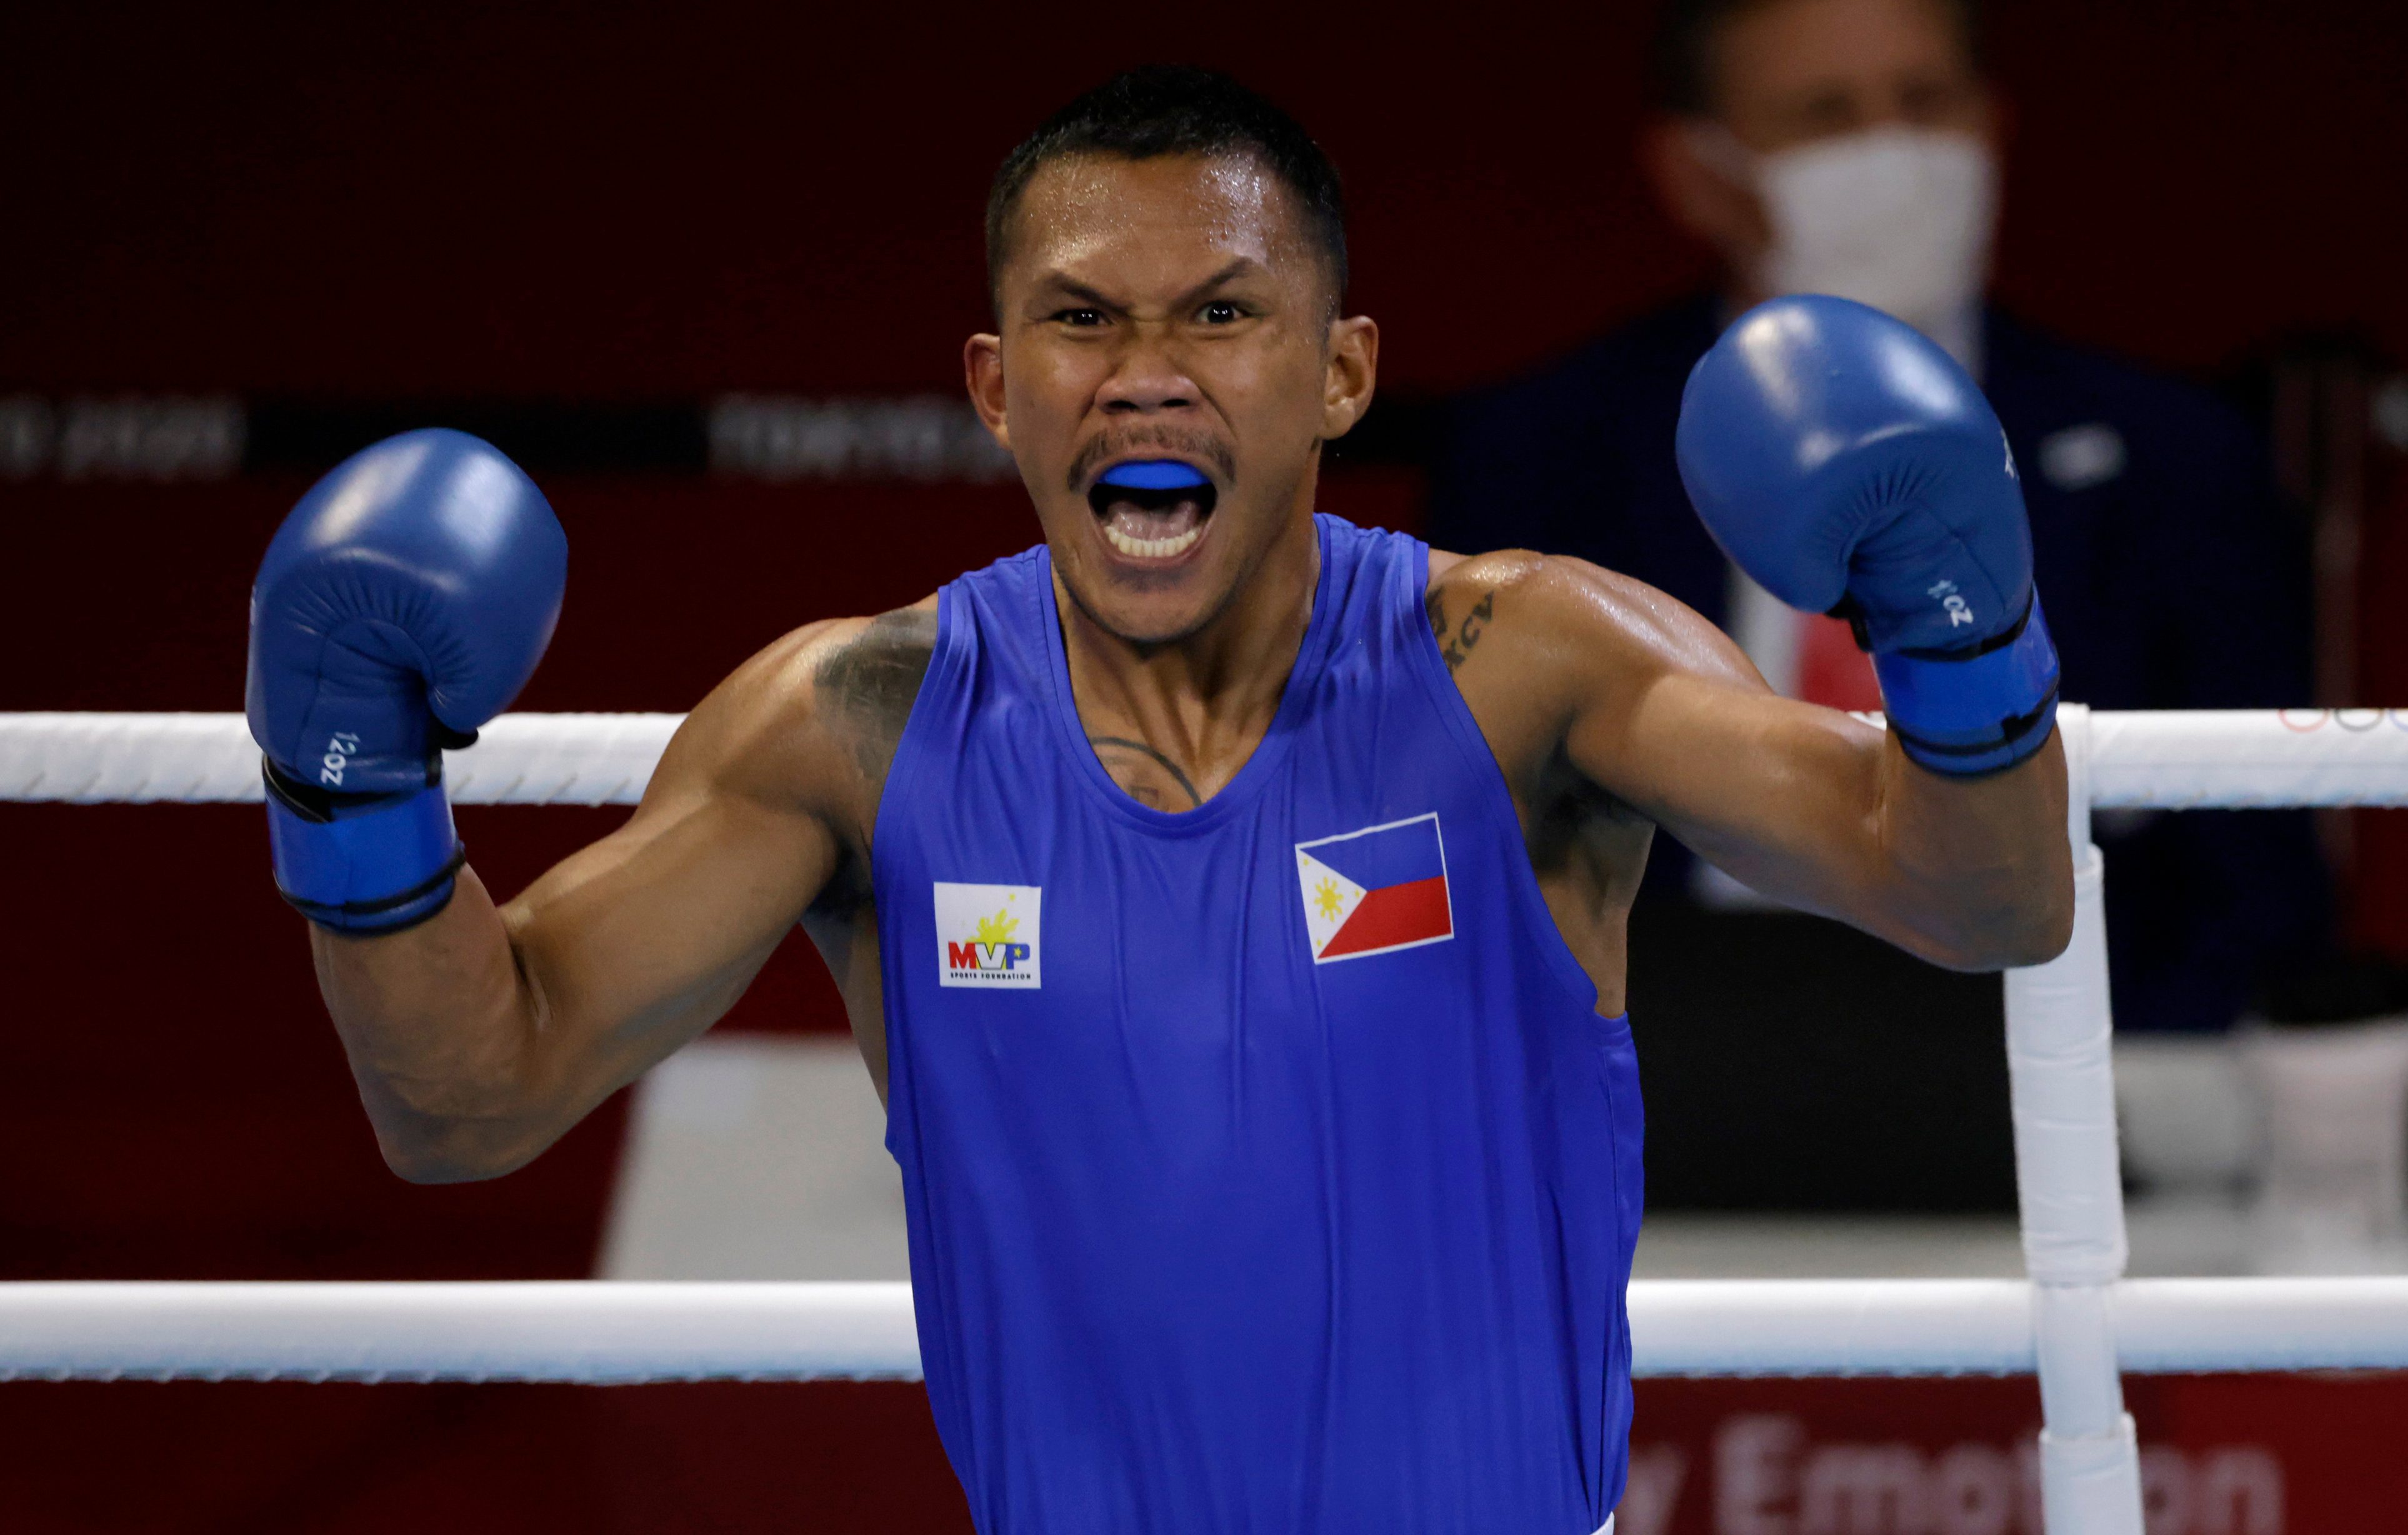 LIST: Eumir Marcial bags millions after Olympic bronze